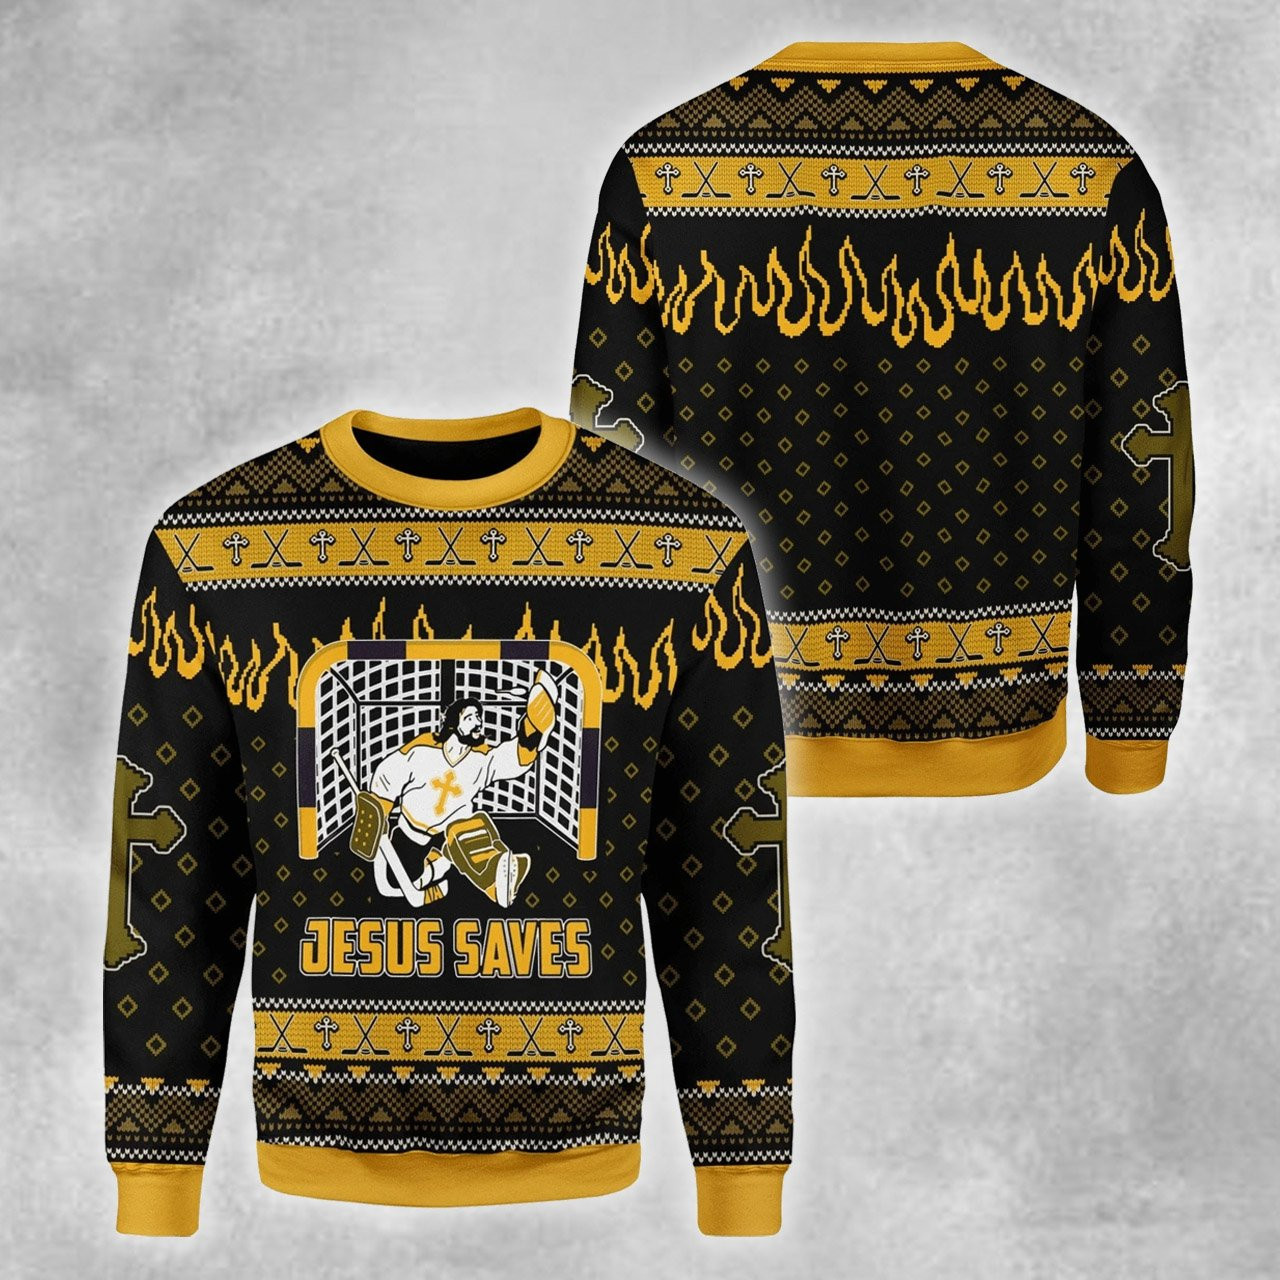 Jesus Saves Hockey Ugly Christmas Sweater Ugly Sweater For Men Women, Holiday Sweater